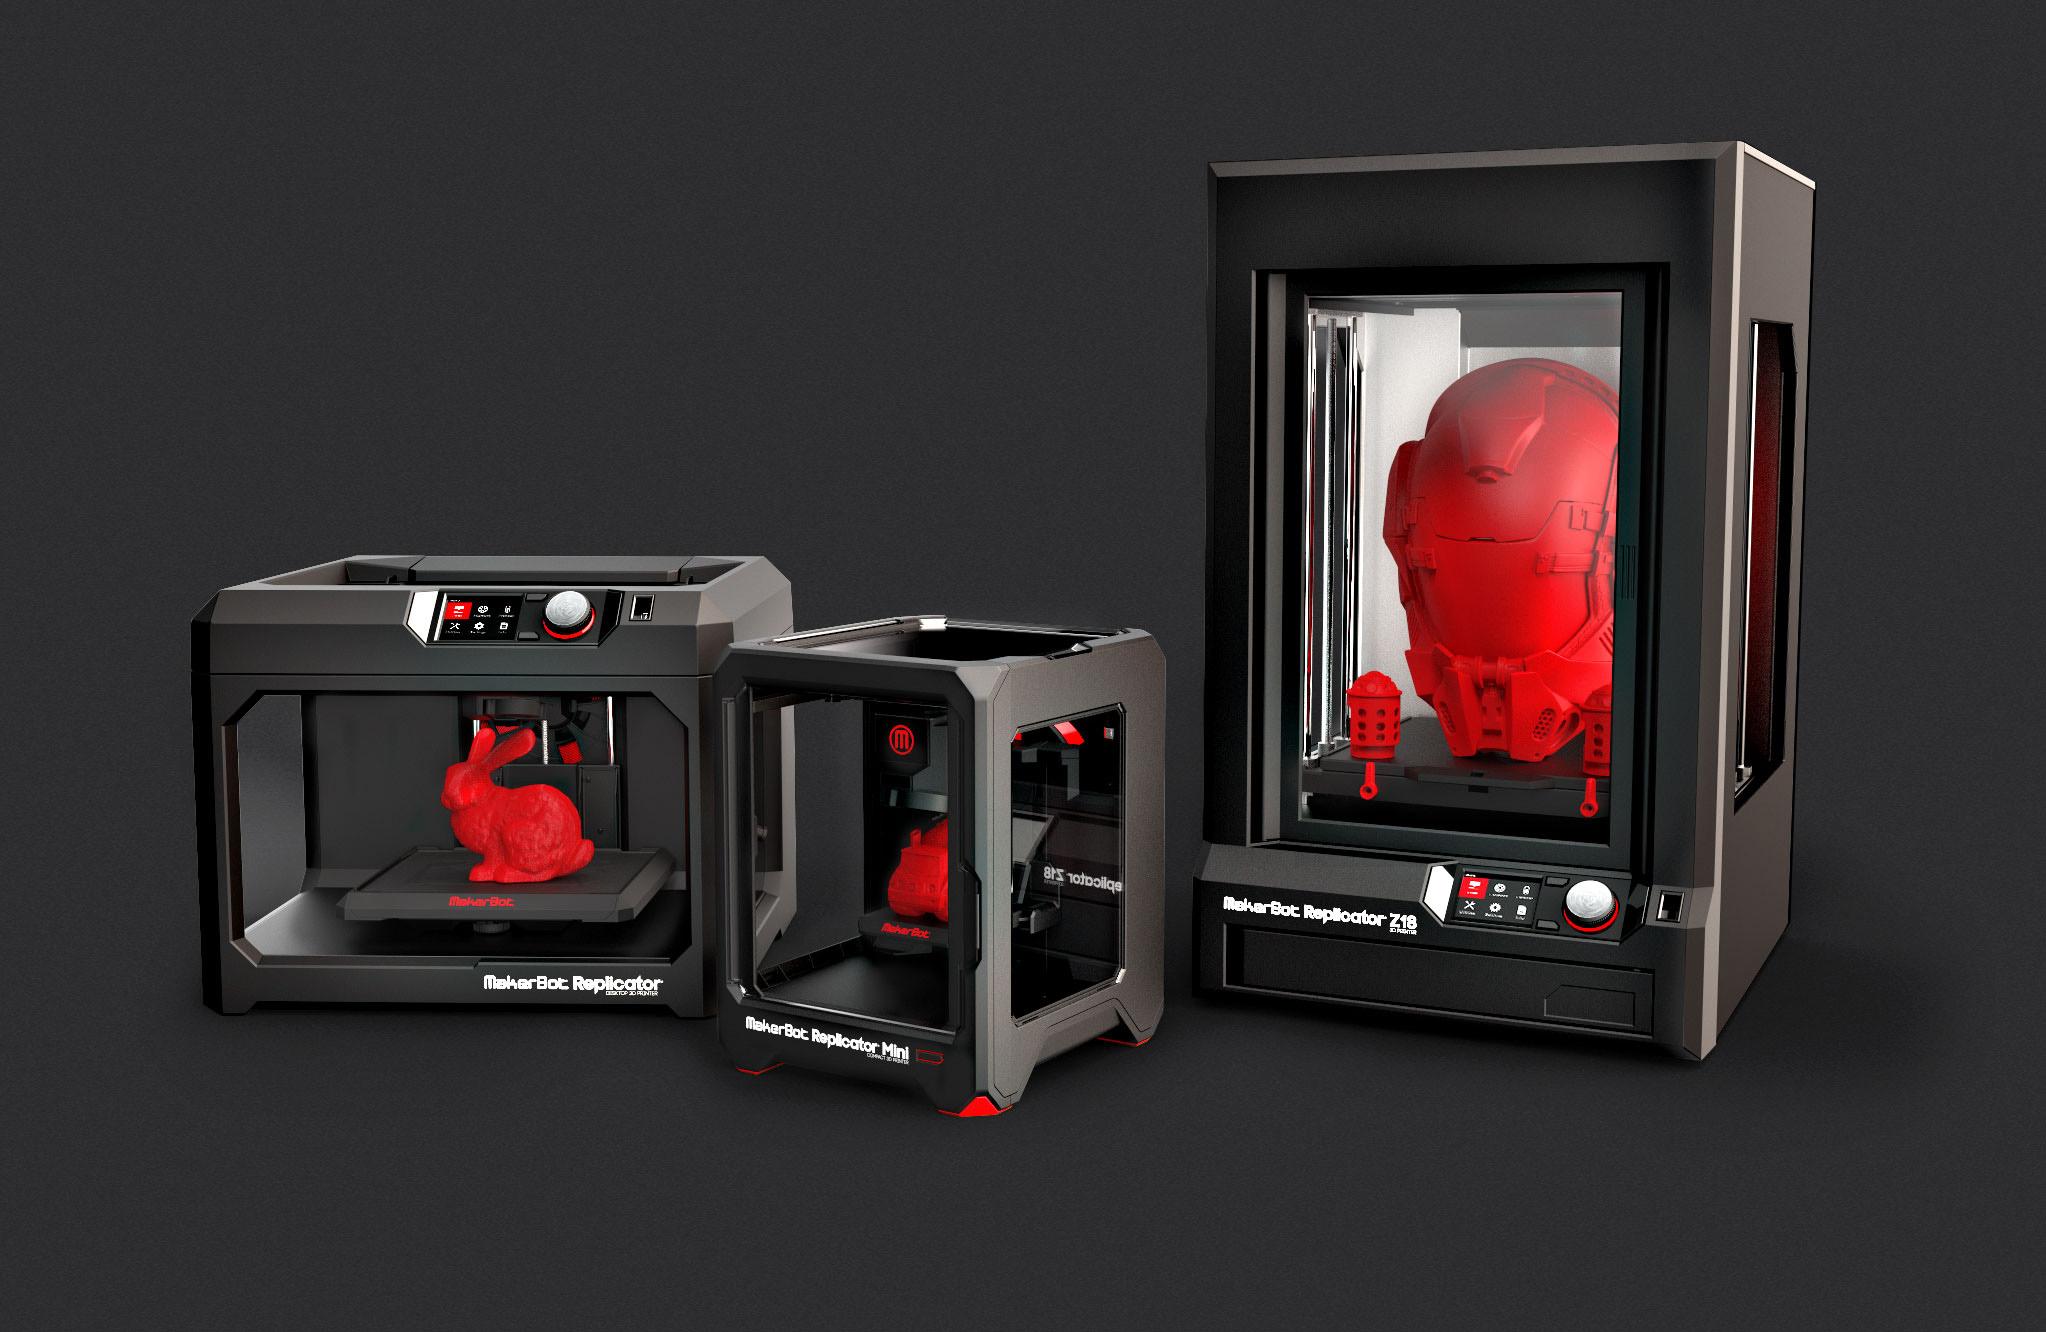 MakerBot and Alloys Partner to Bring 3D Printers, Scanners & Materials